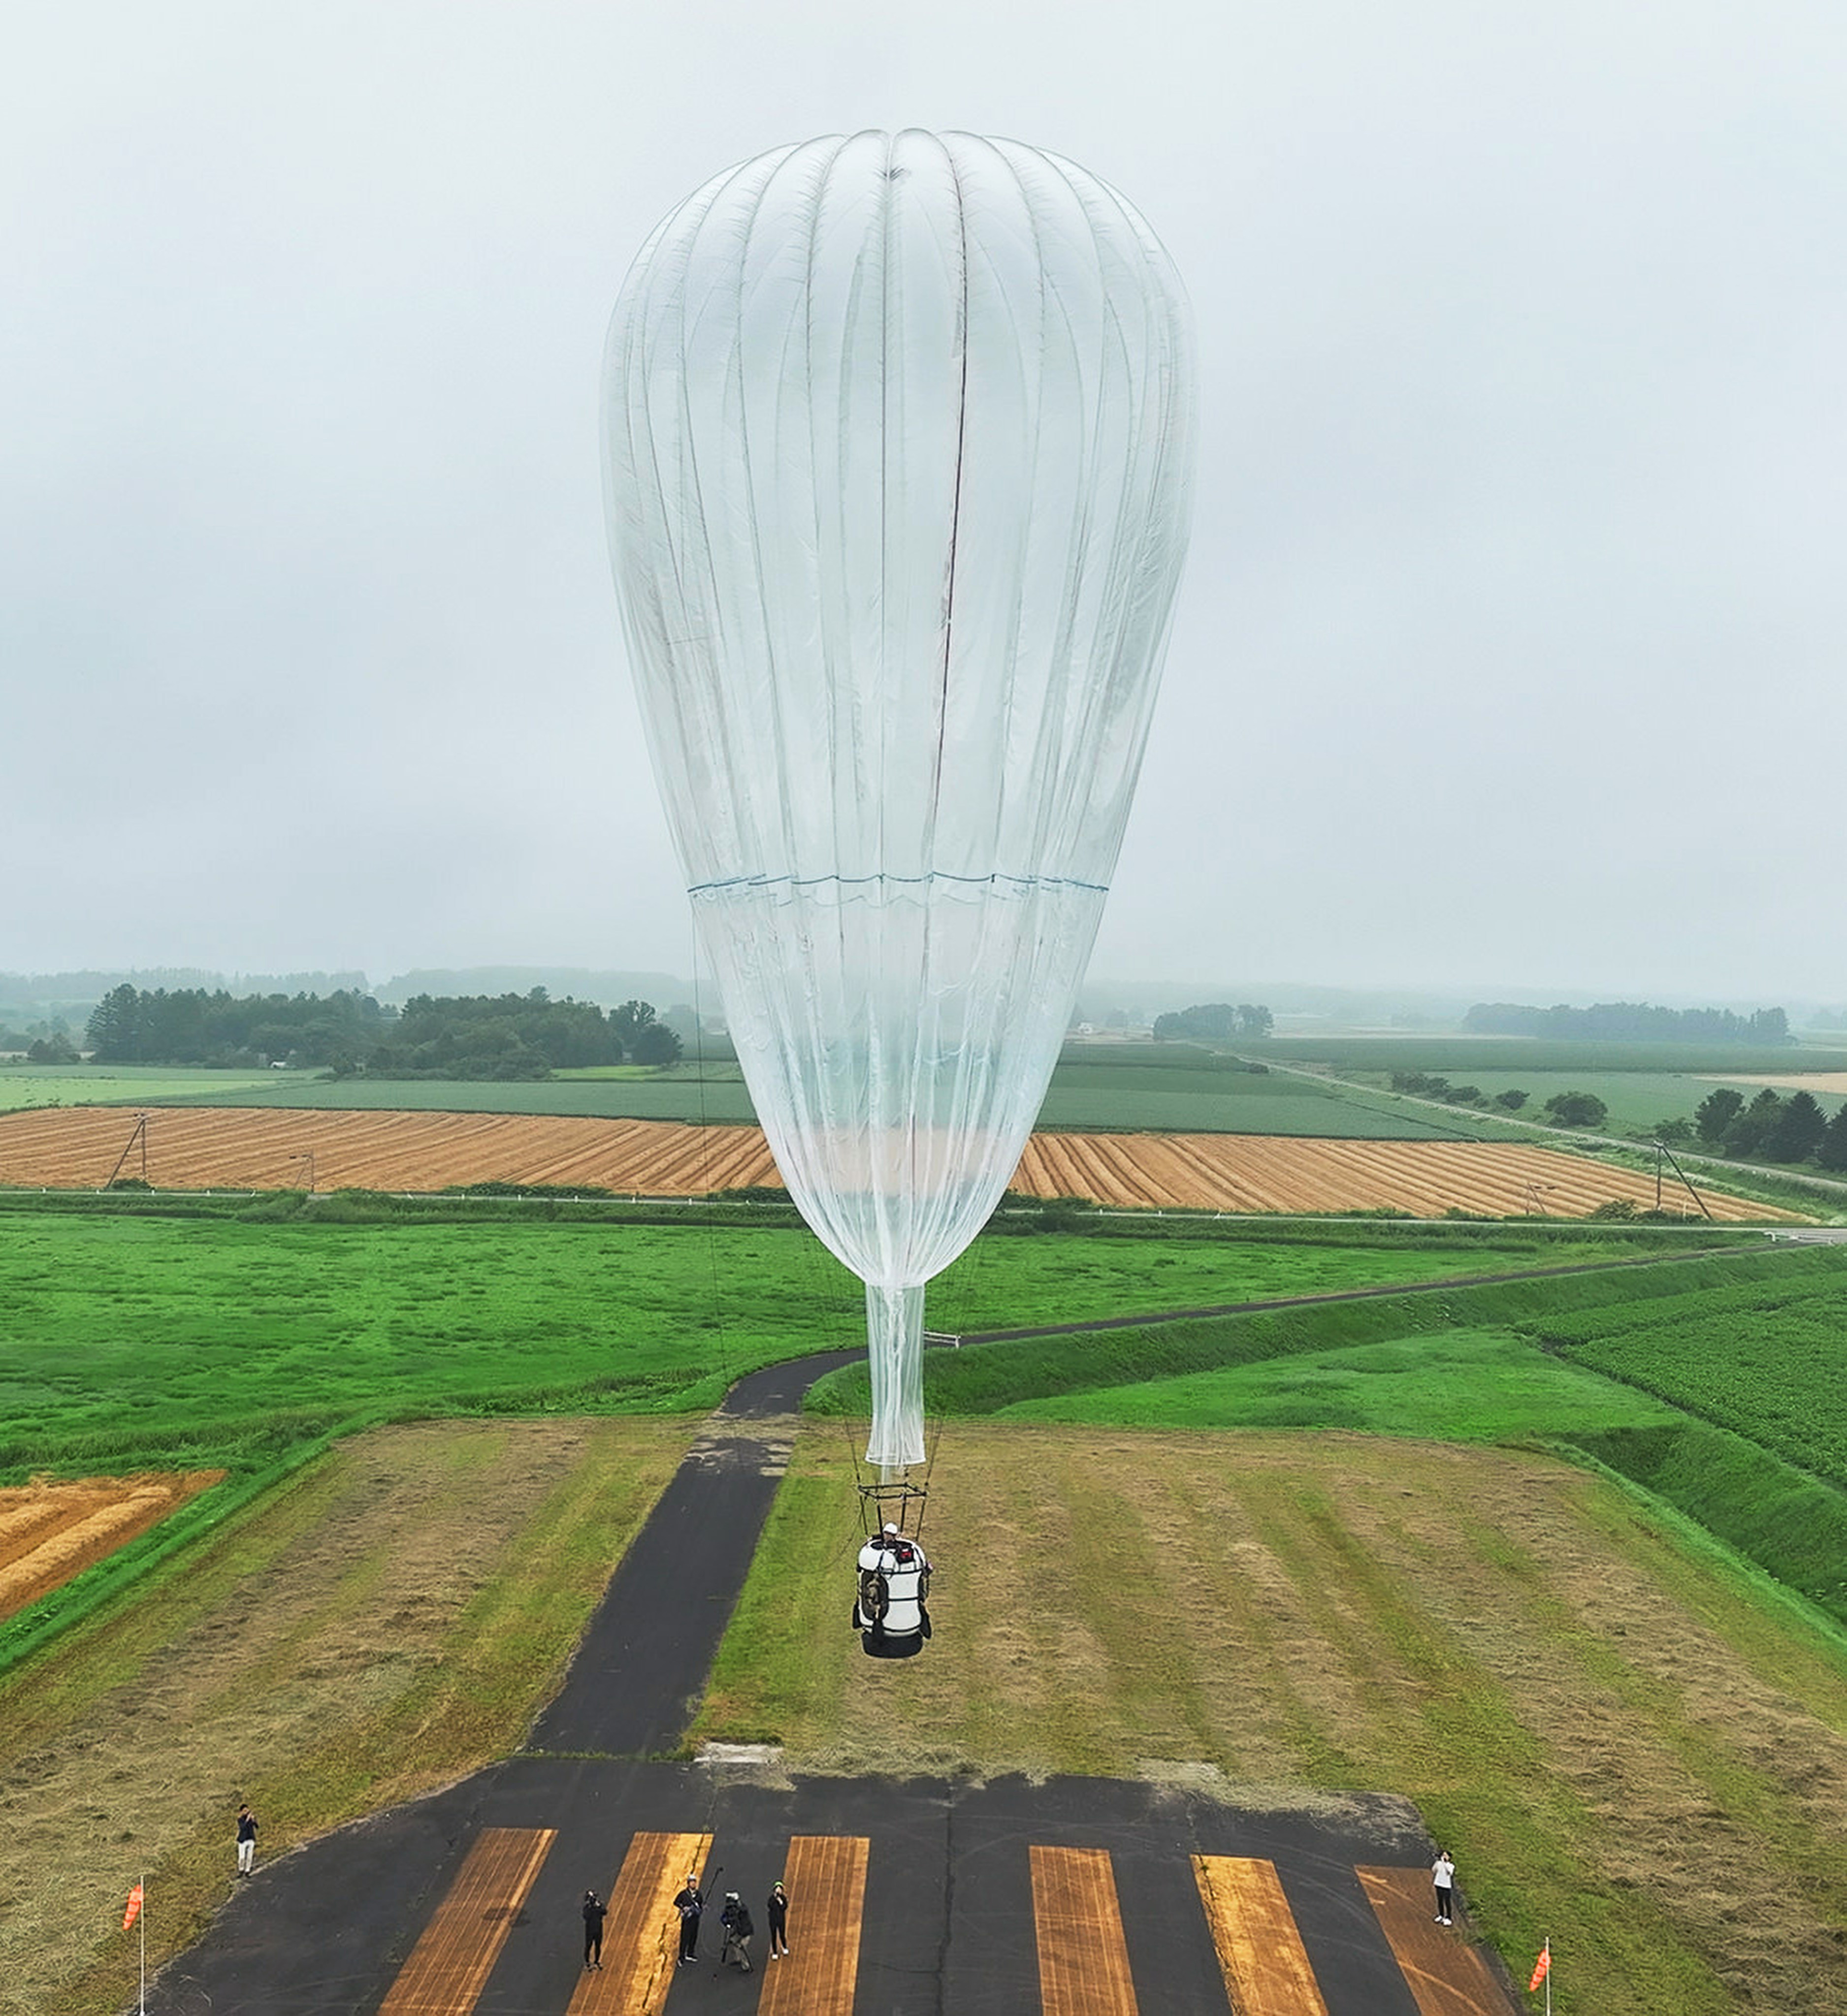 A helium balloon takes off from a test site in the Tokachi region of Hokkaido on July 23, 2023. Photo: Iwaya Inc